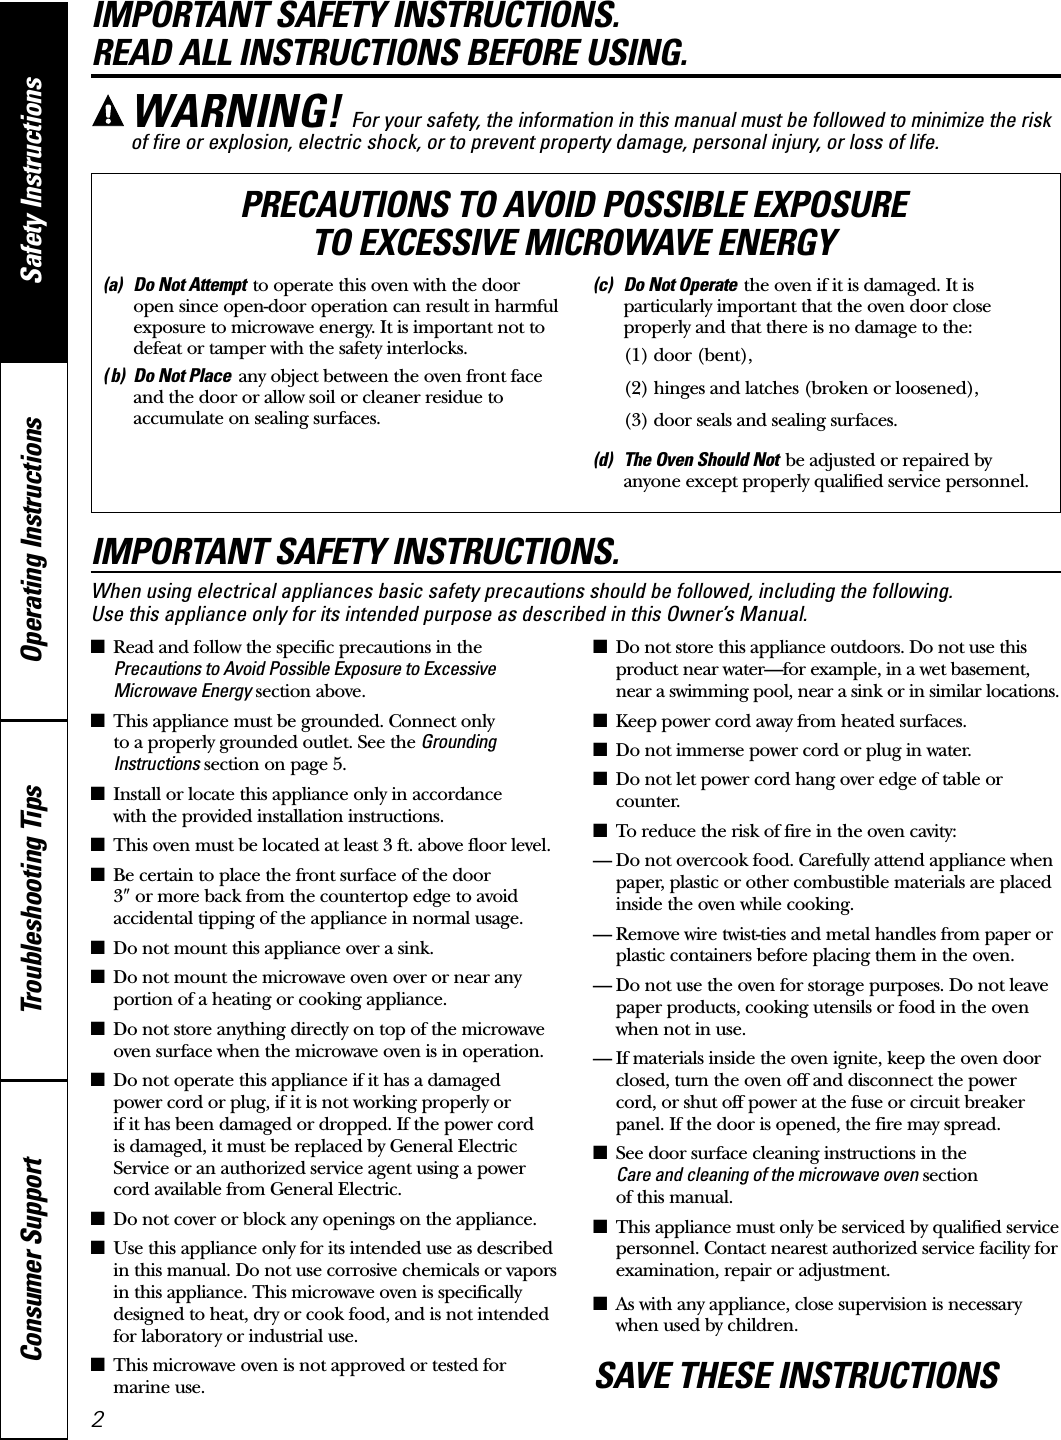 Operating Instructions Safety InstructionsConsumer Support Troubleshooting TipsIMPORTANT SAFETY INSTRUCTIONS. READ ALL INSTRUCTIONS BEFORE USING.IMPORTANT SAFETY INSTRUCTIONS.When using electrical appliances basic safety precautions should be followed, including the following. Use this appliance only for its intended purpose as described in this Owner’s Manual.■Read and follow the specific precautions in thePrecautions to Avoid Possible Exposure to ExcessiveMicrowave Energy section above.■This appliance must be grounded. Connect only to a properly grounded outlet. See the GroundingInstructions section on page 5.■Install or locate this appliance only in accordance with the provided installation instructions.■This oven must be located at least 3 ft. above floor level.■Be certain to place the front surface of the door 3wor more back from the countertop edge to avoidaccidental tipping of the appliance in normal usage.■Do not mount this appliance over a sink. ■Do not mount the microwave oven over or near anyportion of a heating or cooking appliance.■Do not store anything directly on top of the microwaveoven surface when the microwave oven is in operation.■Do not operate this appliance if it has a damaged power cord or plug, if it is not working properly or if it has been damaged or dropped. If the power cord is damaged, it must be replaced by General ElectricService or an authorized service agent using a powercord available from General Electric.■Do not cover or block any openings on the appliance.■Use this appliance only for its intended use as describedin this manual. Do not use corrosive chemicals or vaporsin this appliance. This microwave oven is specificallydesigned to heat, dry or cook food, and is not intendedfor laboratory or industrial use.■This microwave oven is not approved or tested formarine use.■Do not store this appliance outdoors. Do not use thisproduct near water—for example, in a wet basement,near a swimming pool, near a sink or in similar locations.■Keep power cord away from heated surfaces.■Do not immerse power cord or plug in water.■Do not let power cord hang over edge of table orcounter. ■To reduce the risk of fire in the oven cavity:— Do not overcook food. Carefully attend appliance whenpaper, plastic or other combustible materials are placedinside the oven while cooking.— Remove wire twist-ties and metal handles from paper orplastic containers before placing them in the oven.— Do not use the oven for storage purposes. Do not leavepaper products, cooking utensils or food in the ovenwhen not in use.— If materials inside the oven ignite, keep the oven doorclosed, turn the oven off and disconnect the powercord, or shut off power at the fuse or circuit breakerpanel. If the door is opened, the fire may spread.■See door surface cleaning instructions in the Care and cleaning of the microwave oven sectionof this manual.■This appliance must only be serviced by qualified servicepersonnel. Contact nearest authorized service facility forexamination, repair or adjustment.■As with any appliance, close supervision is necessarywhen used by children.SAVE THESE INSTRUCTIONSWARNING! For your safety, the information in this manual must be followed to minimize the riskof fire or explosion, electric shock, or to prevent property damage, personal injury, or loss of life.(a) Do Not Attempt to operate this oven with the dooropen since open-door operation can result in harmfulexposure to microwave energy. It is important not todefeat or tamper with the safety interlocks.( b) Do Not Place any object between the oven front faceand the door or allow soil or cleaner residue toaccumulate on sealing surfaces.(c) Do Not Operate the oven if it is damaged. It isparticularly important that the oven door closeproperly and that there is no damage to the:(1) door (bent),(2) hinges and latches (broken or loosened),(3) door seals and sealing surfaces.(d) The Oven Should Not be adjusted or repaired byanyone except properly qualified service personnel.PRECAUTIONS TO AVOID POSSIBLE EXPOSURE TO EXCESSIVE MICROWAVE ENERGY2